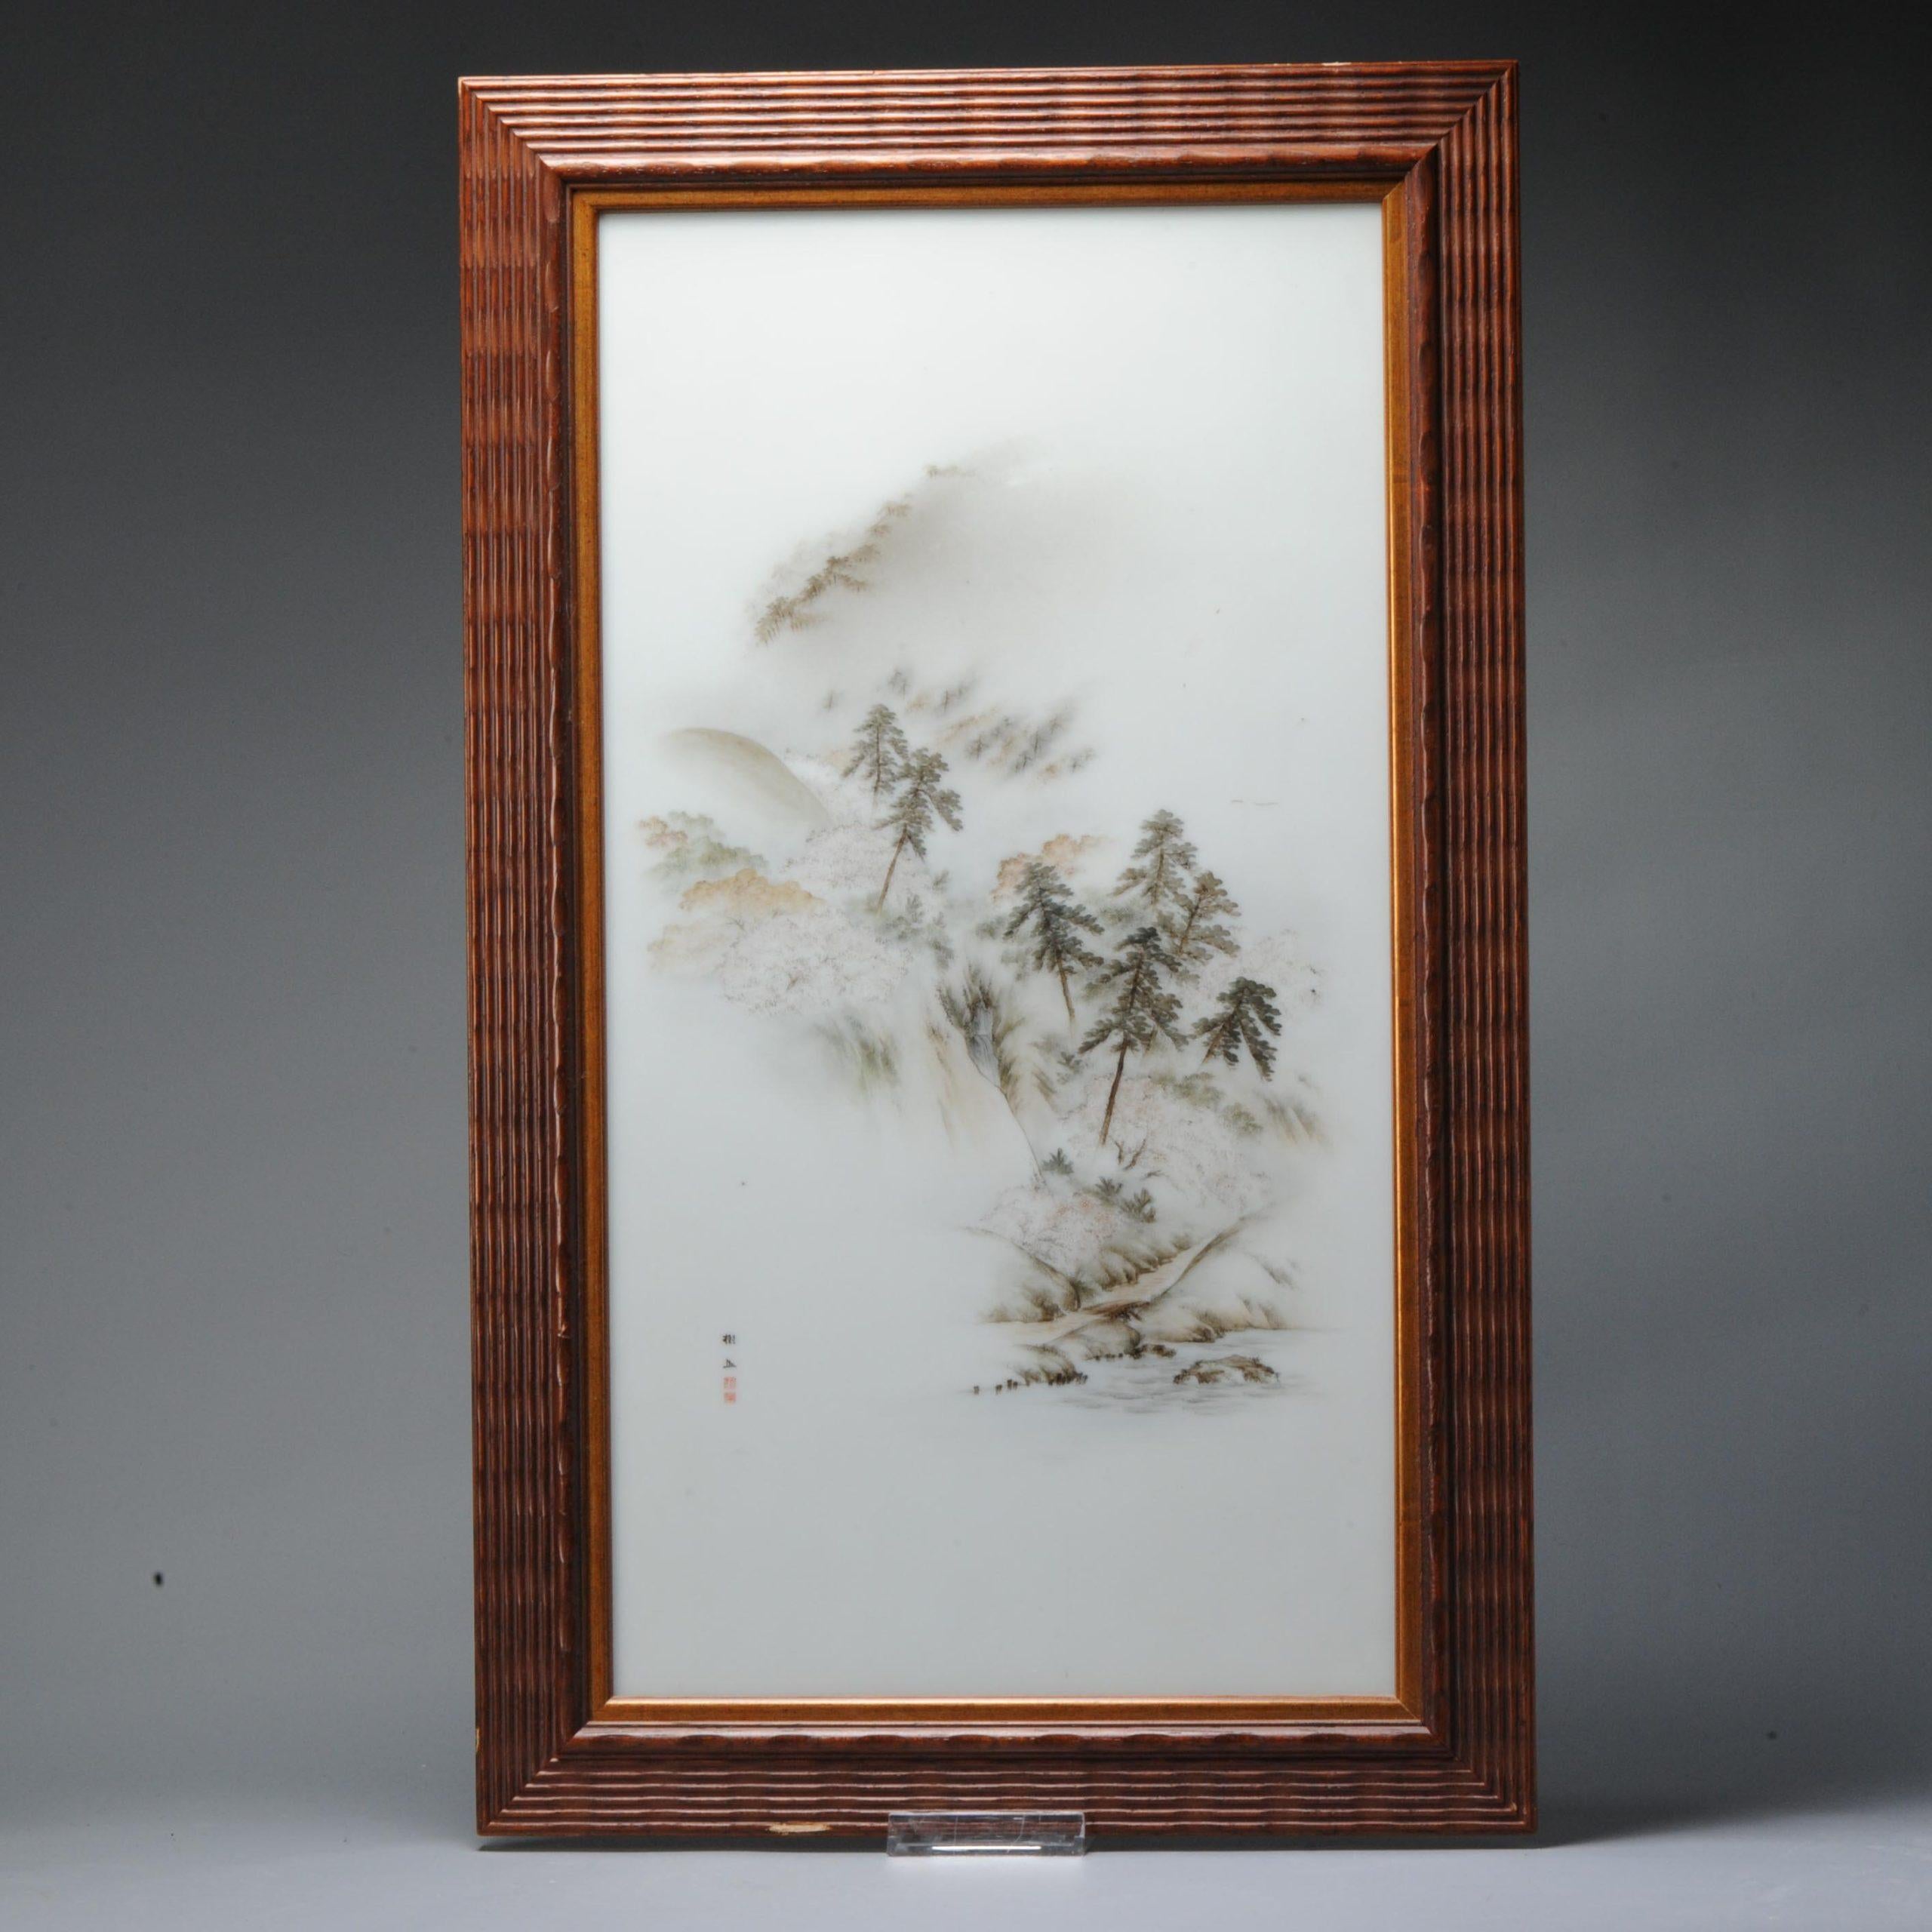 Description

Faboulous japanese porcelain plaque. Very high quality painting of a Mountain landscape.

Marked with signature.

Condition
Small age signs like a small scratch in de middle right and some other small damage or firing spots. Size